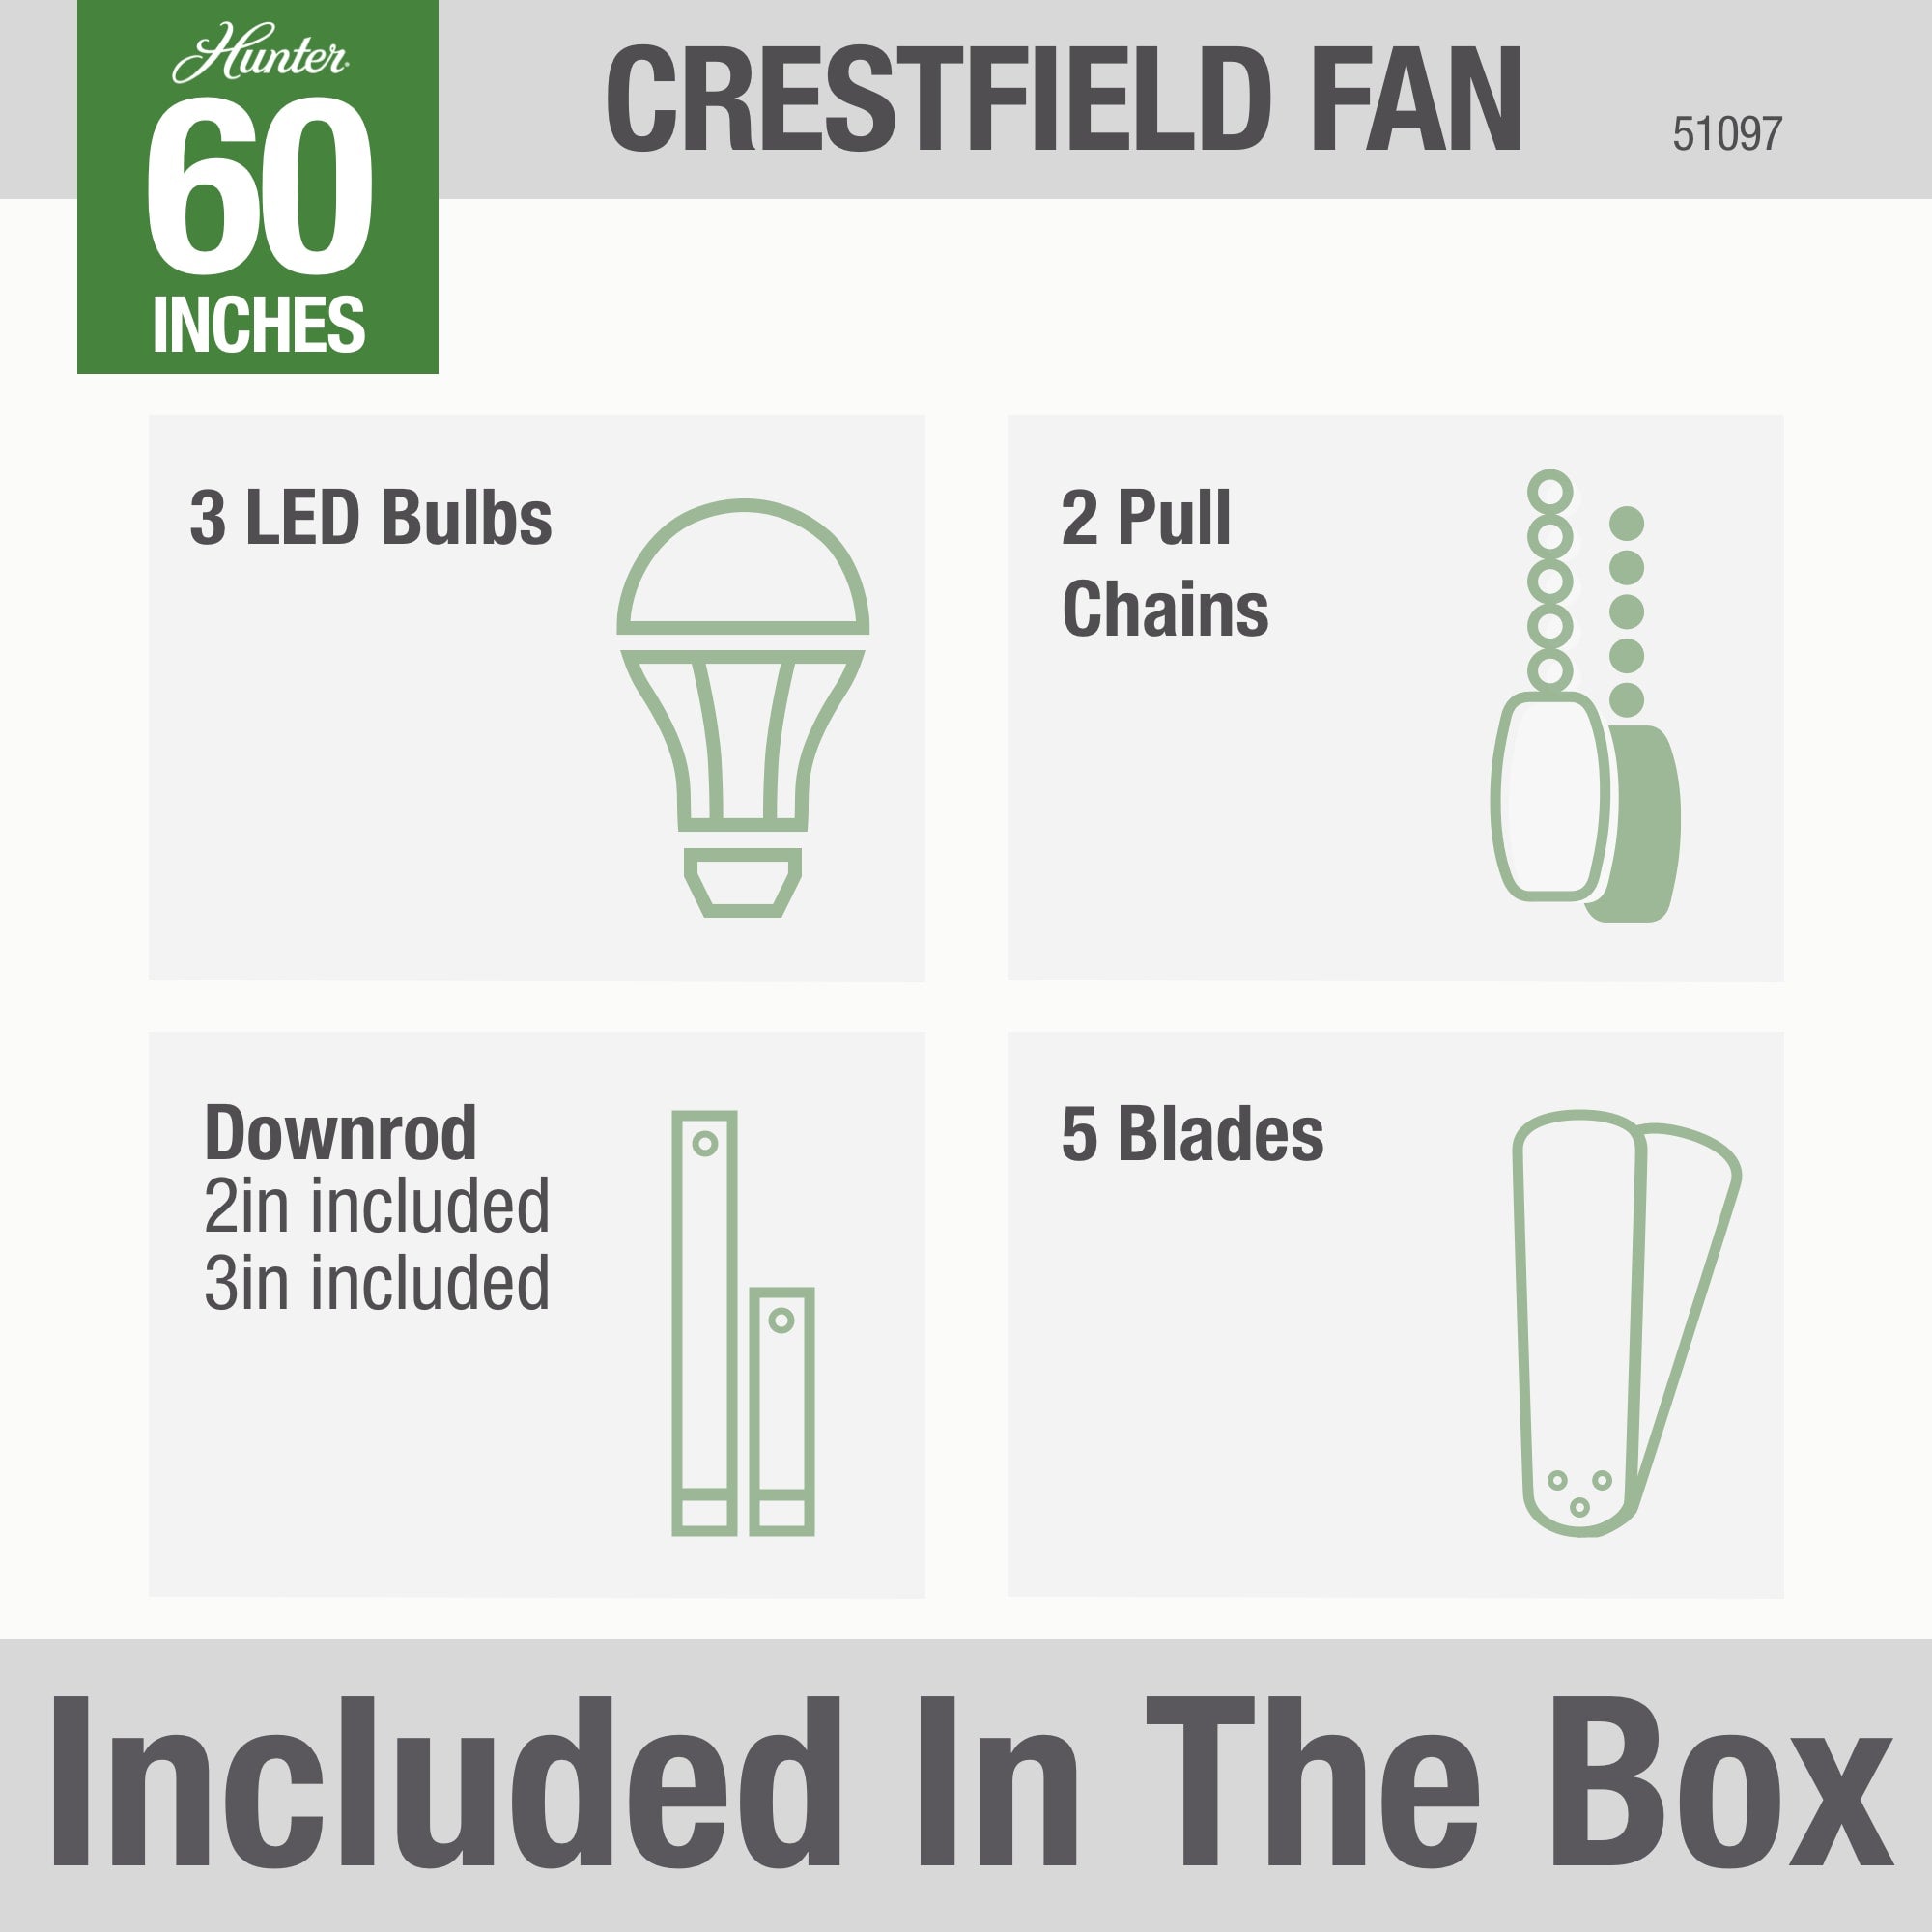 Hunter 60 inch Crestfield Ceiling Fan with LED Light Kit and Pull Chain